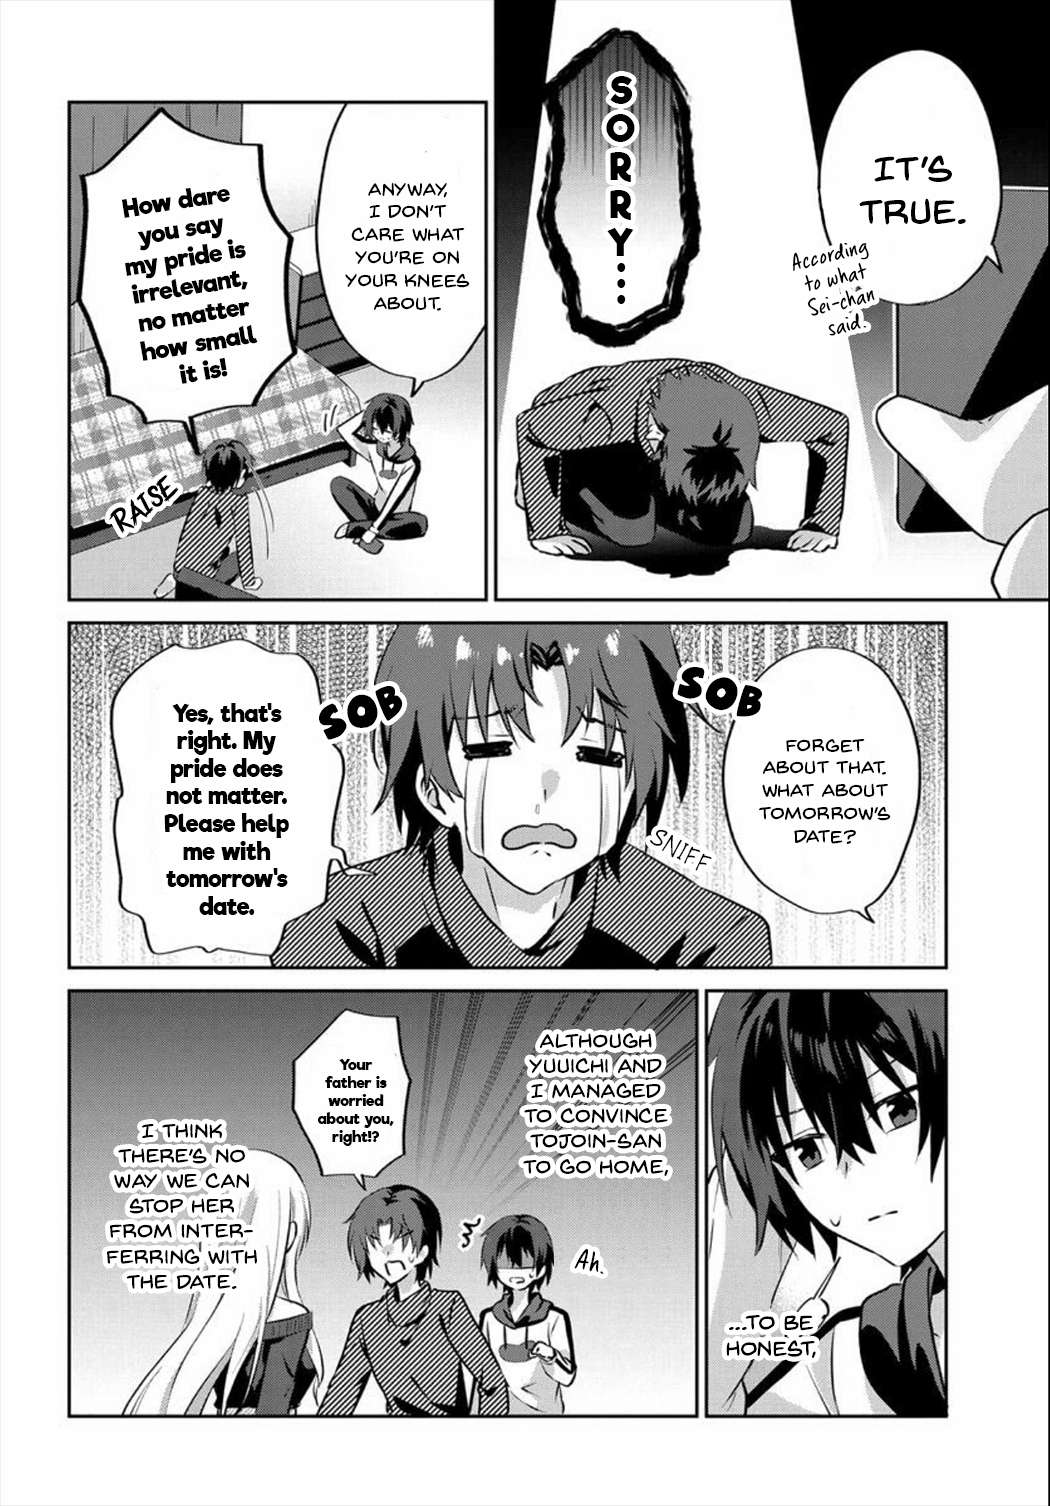 Since I’Ve Entered The World Of Romantic Comedy Manga, I’Ll Do My Best To Make The Losing Heroine Happy - chapter 6.1 - #4